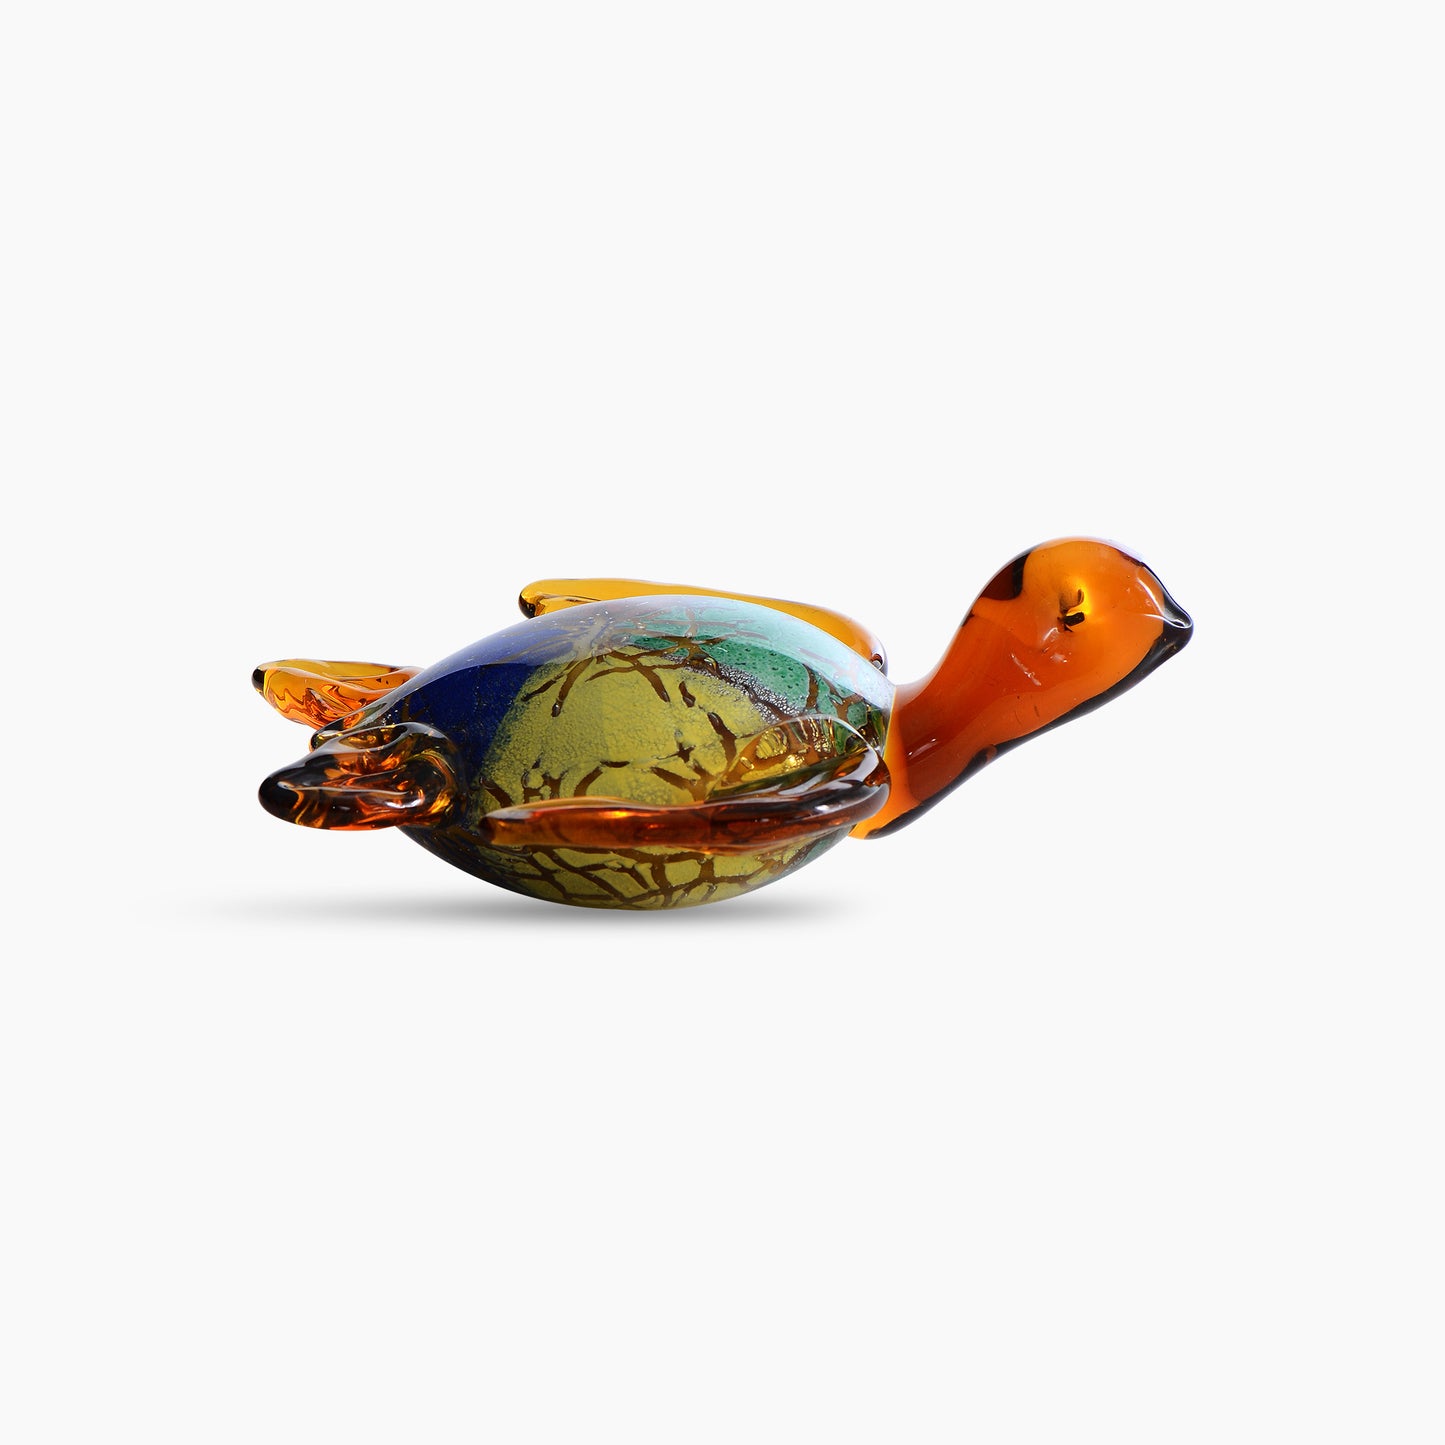 Adorable Floating Colored Glass Lucky Turtle Display Figurine